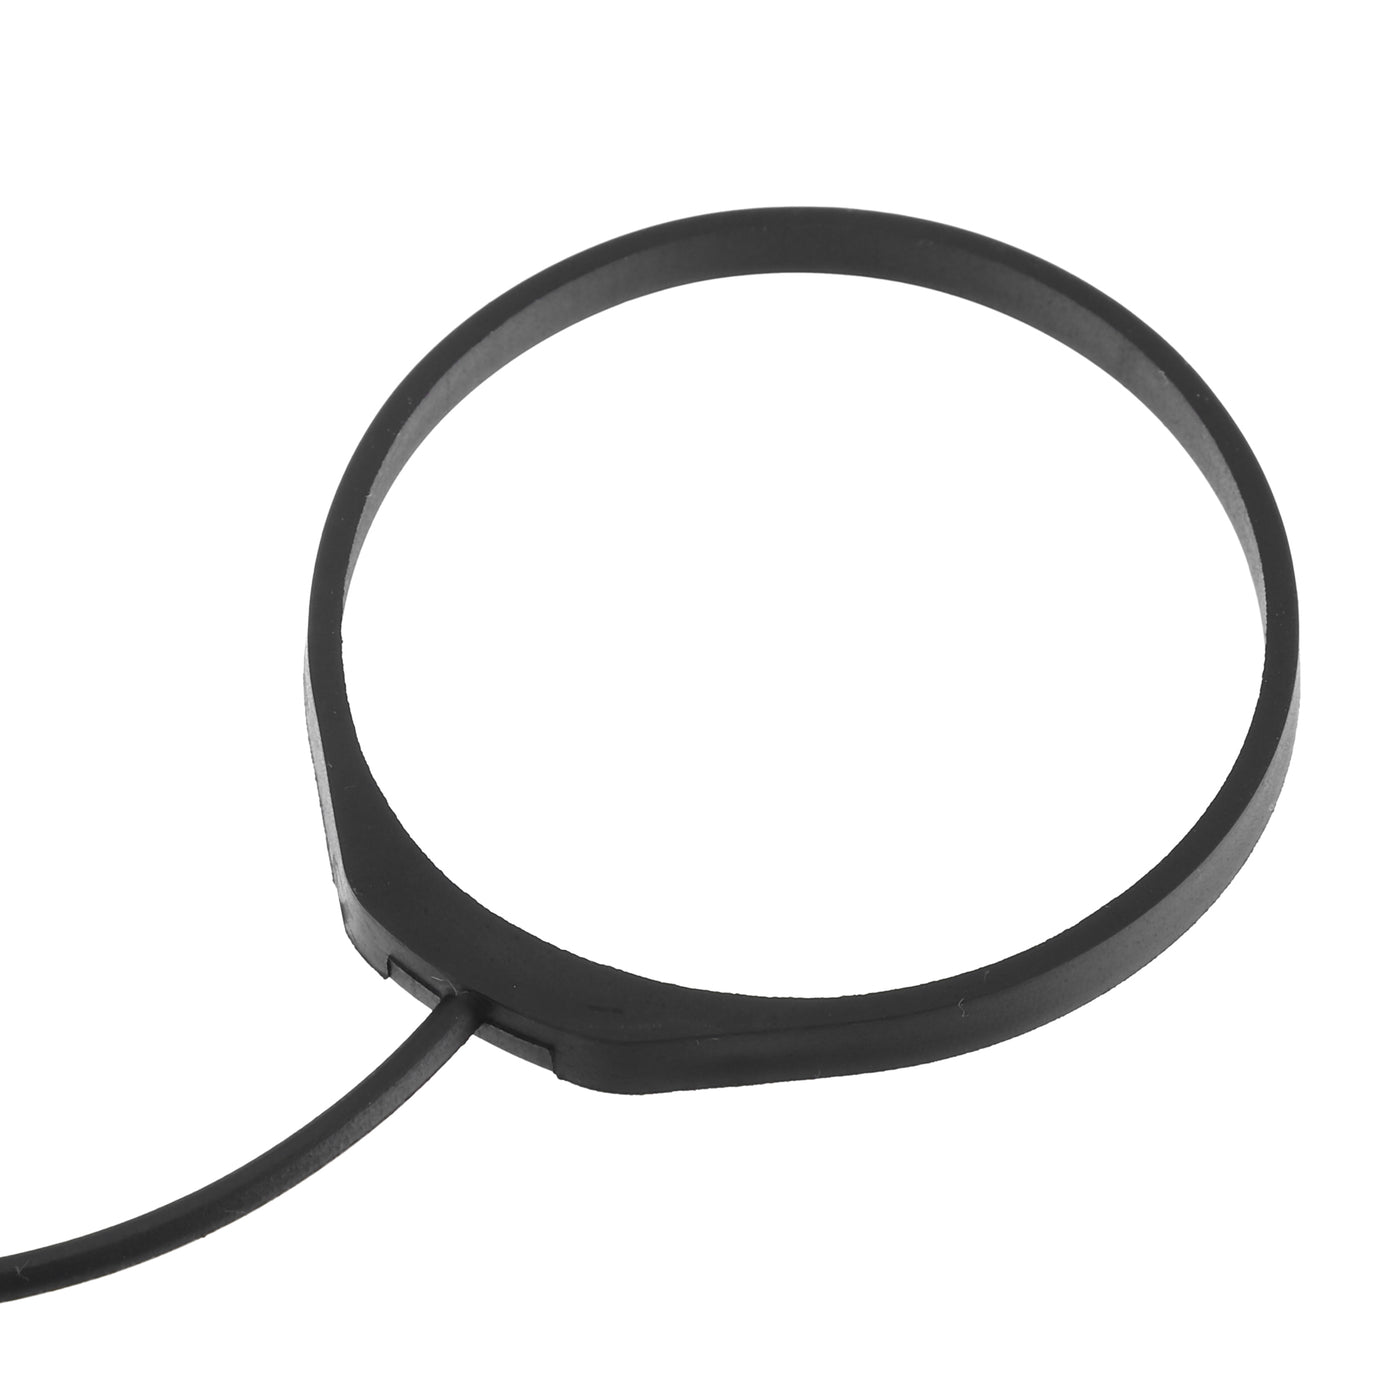 ACROPIX Fuel Tank Cap Tether Fuel Tank Rope Replacement Fit for Land Rover - Pack of 1 Black